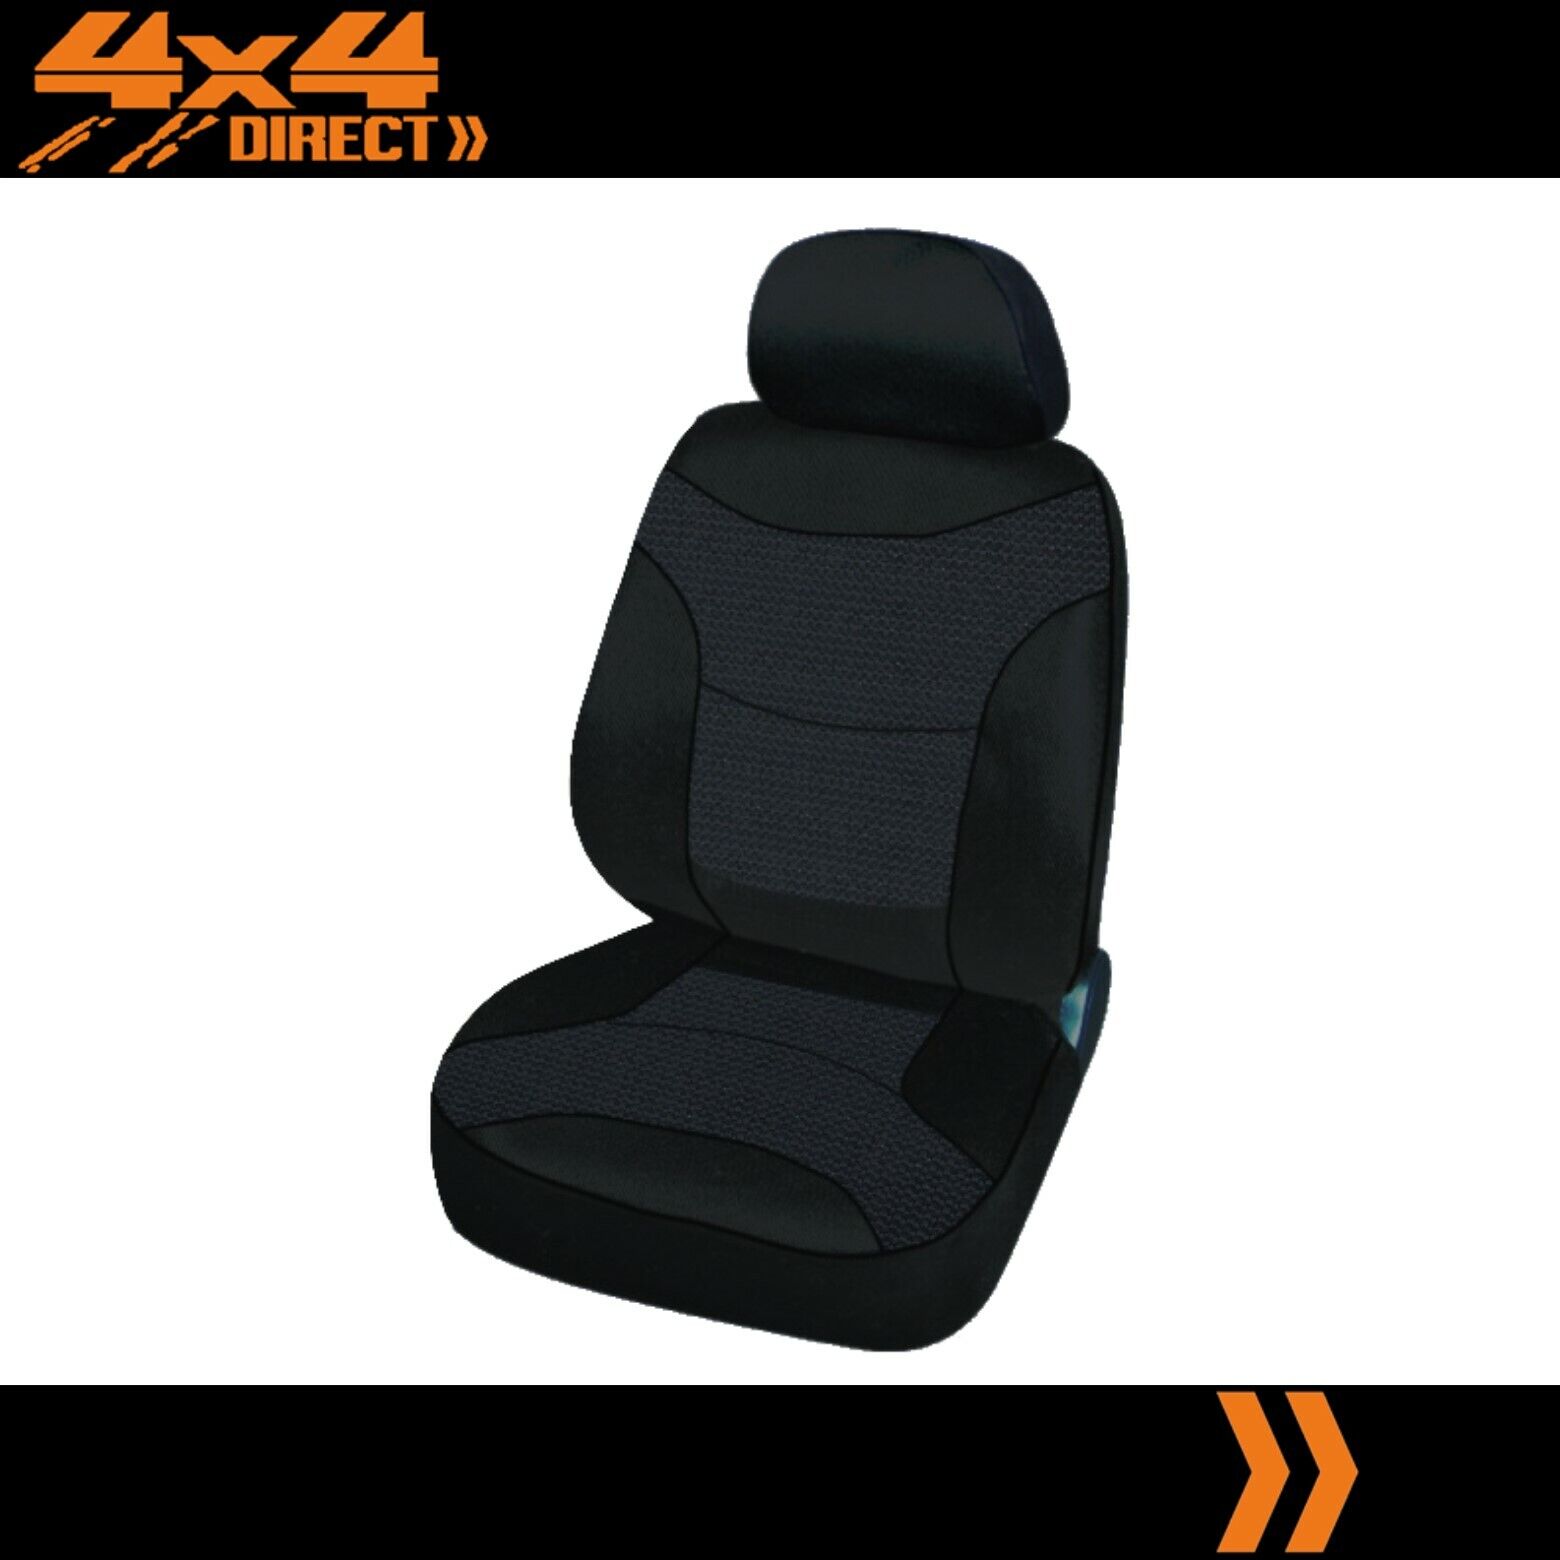 SINGLE BLACK MODERN JACQUARD SEAT COVER FOR FORD FPV GT